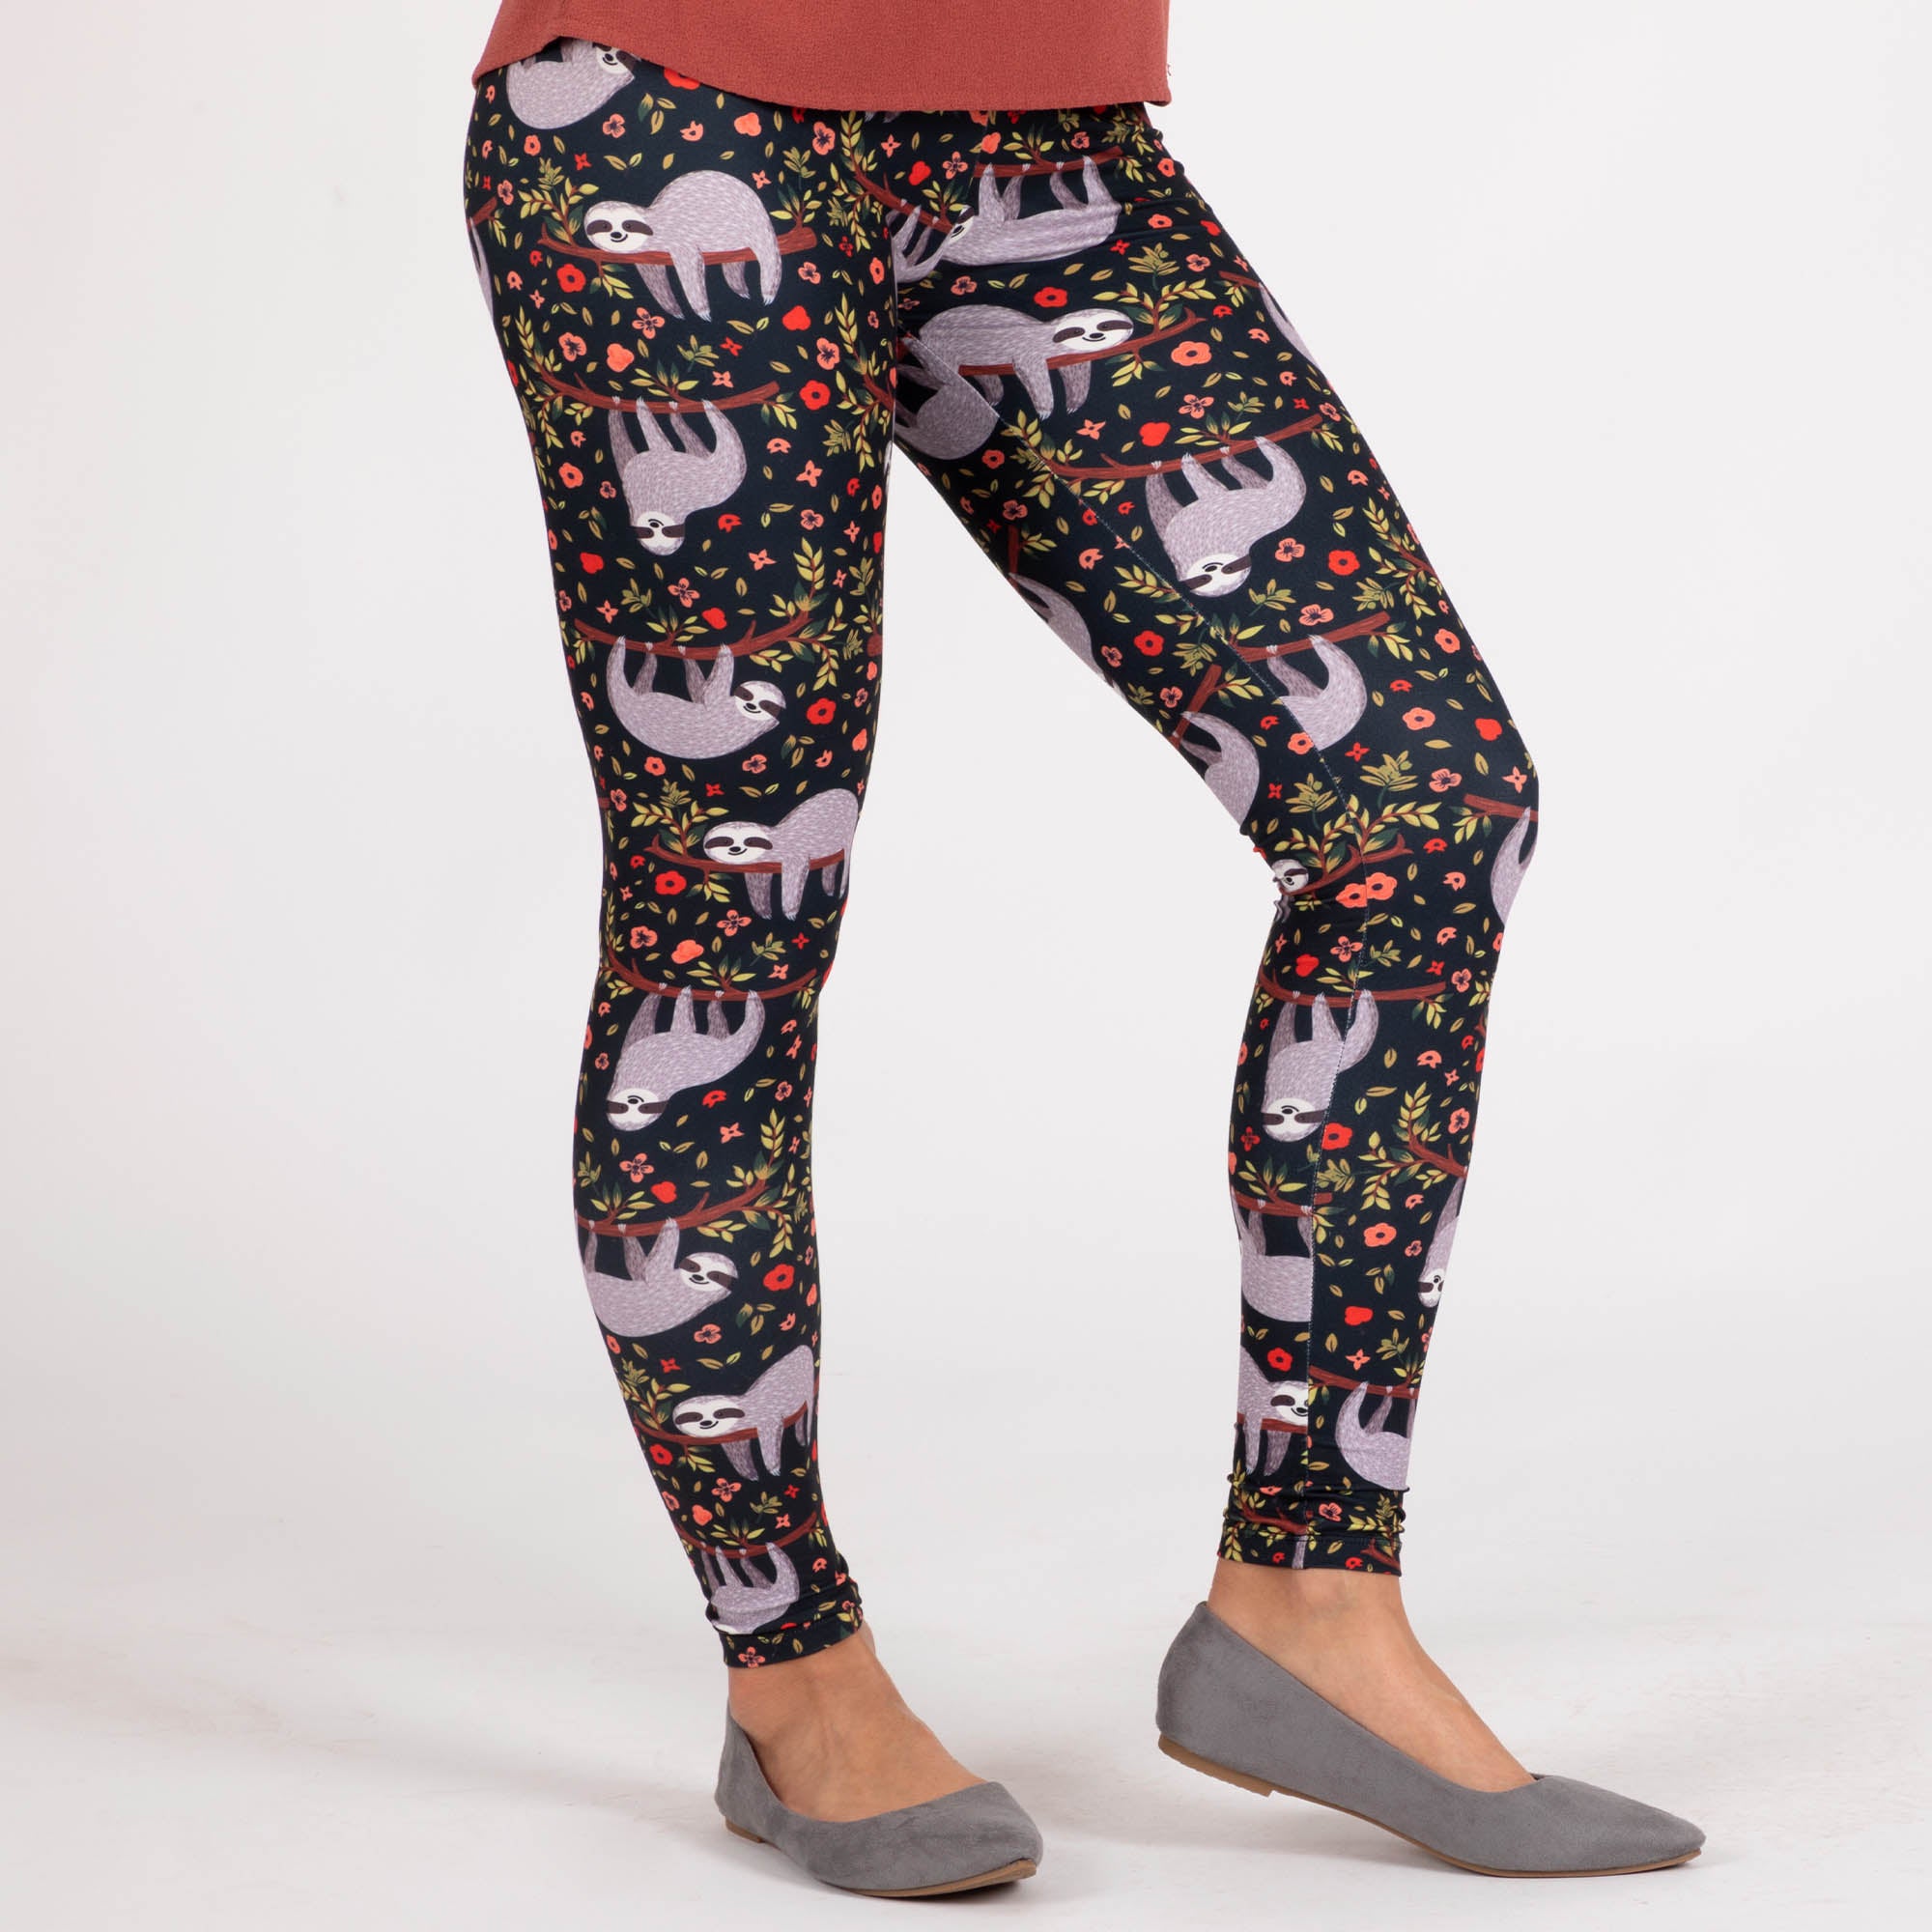 In The Wild Ultra Soft Leggings - Sloth - S